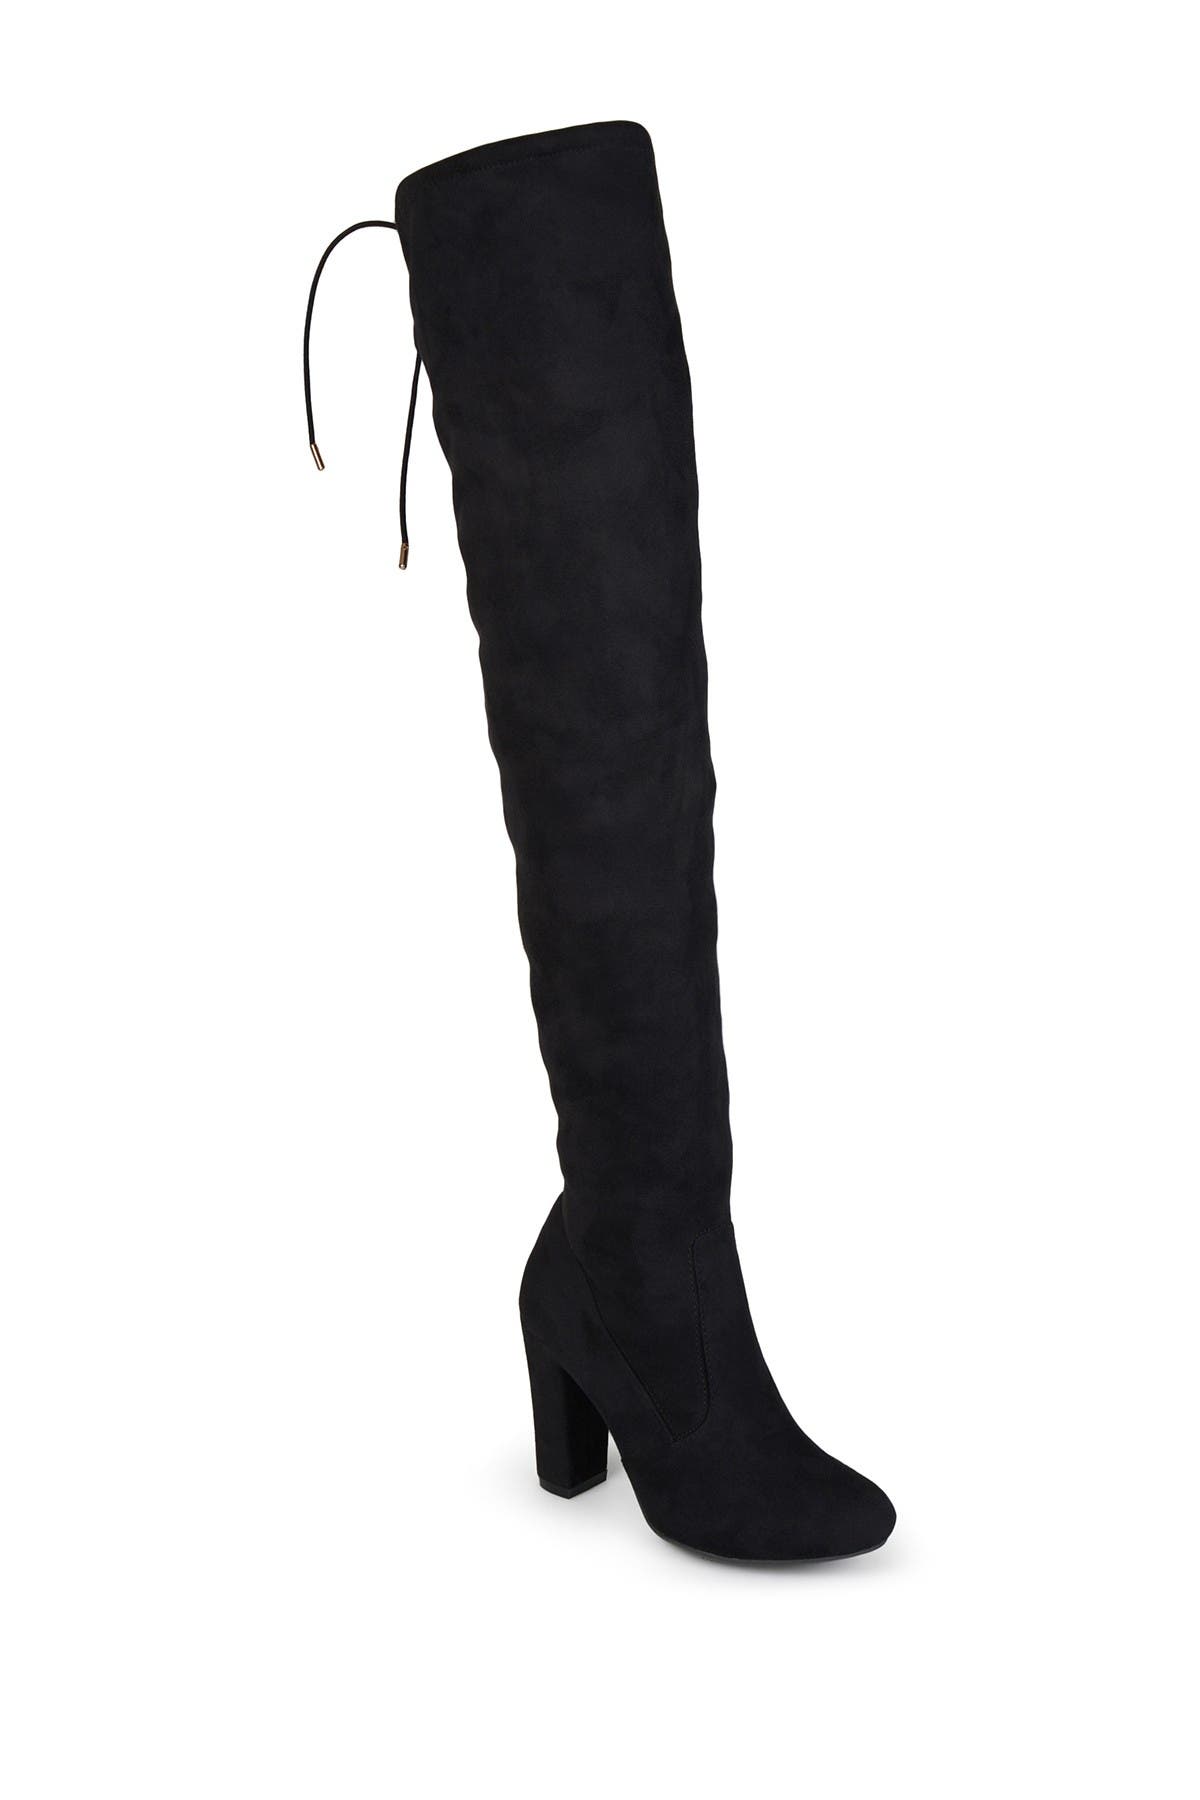 over the knee boots for wide calves